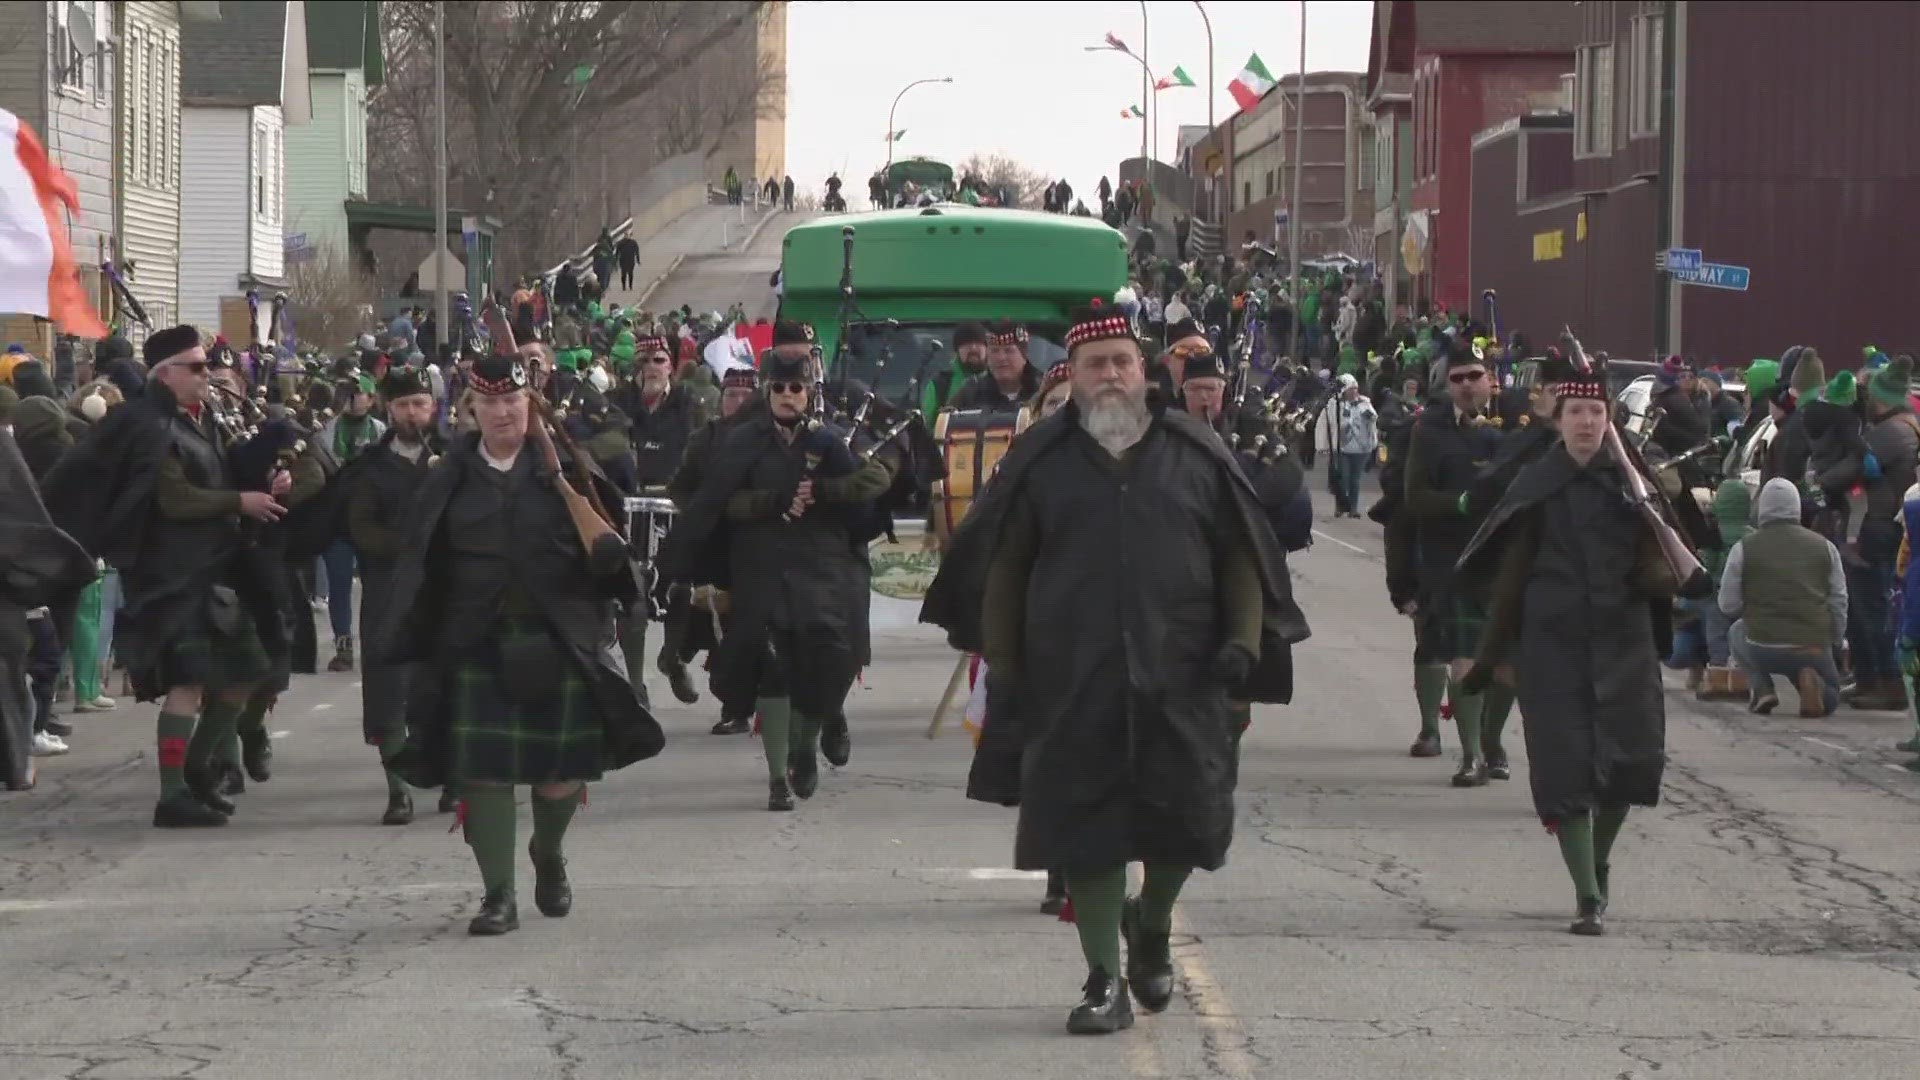 More than 100 groups marched on Saturday afternoon, including Irish dancers, classic cars, and first responders.